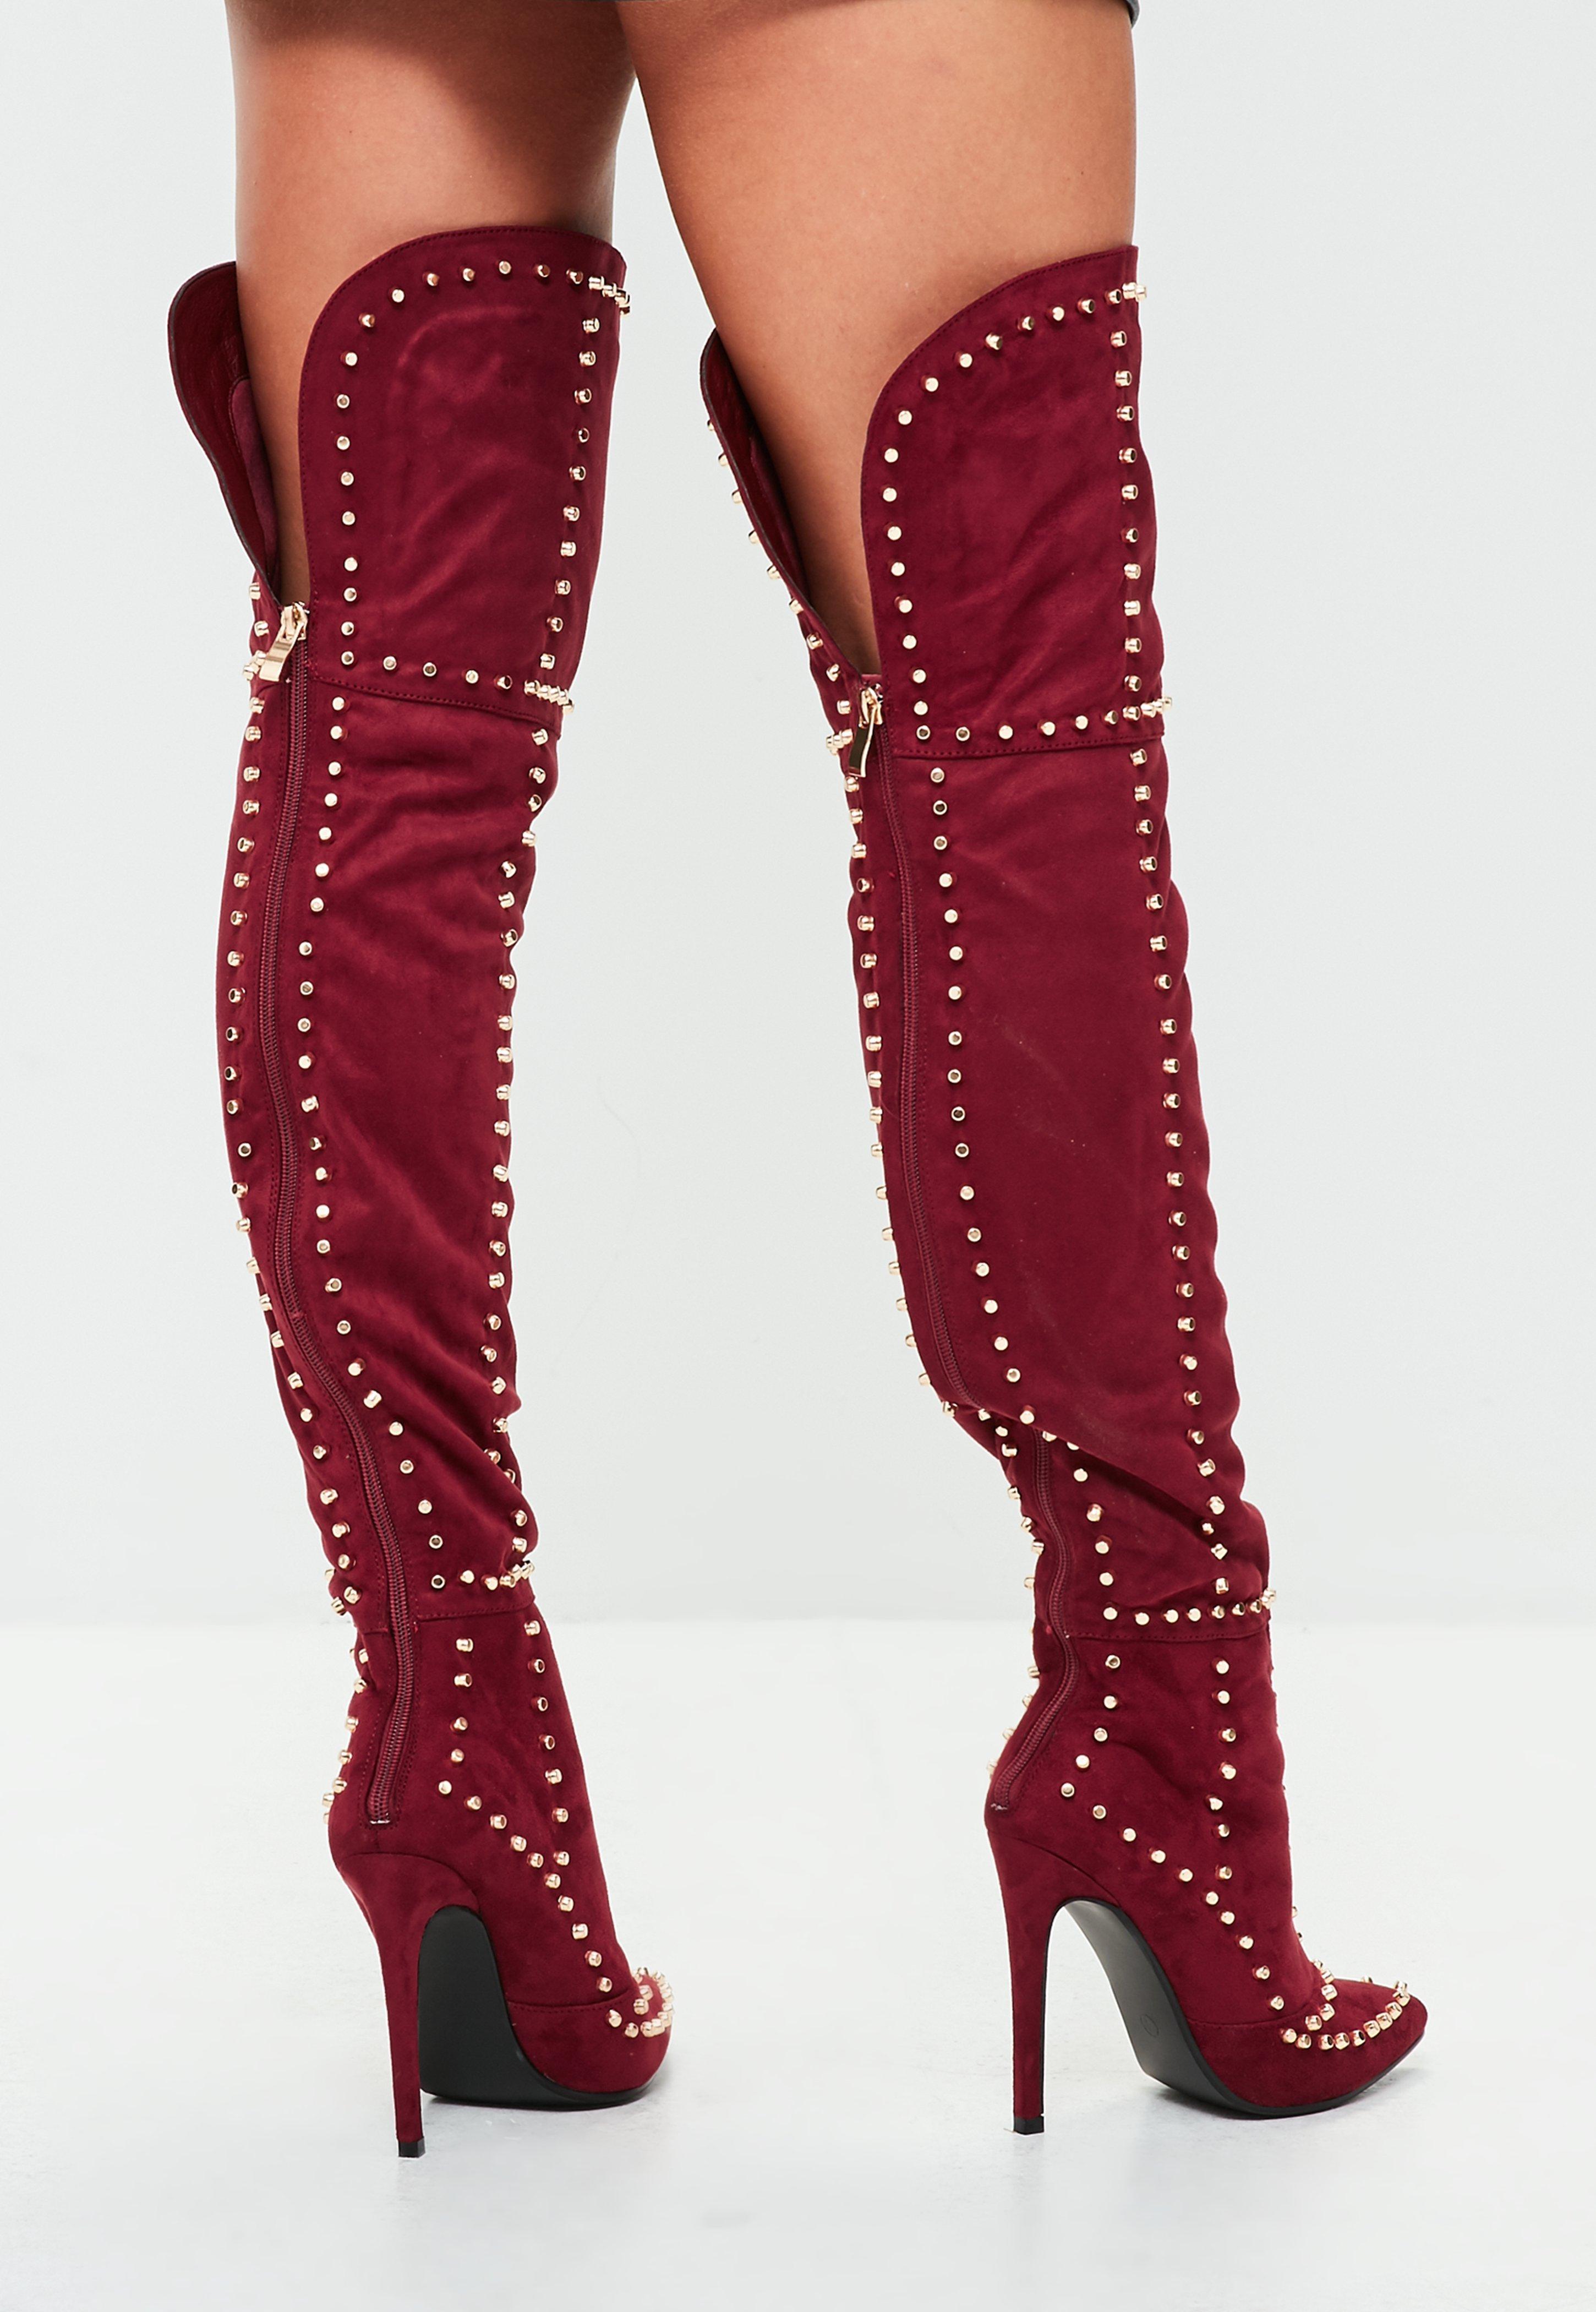 Lyst - Missguided Burgundy Multi Studded Thigh High Boots in Red